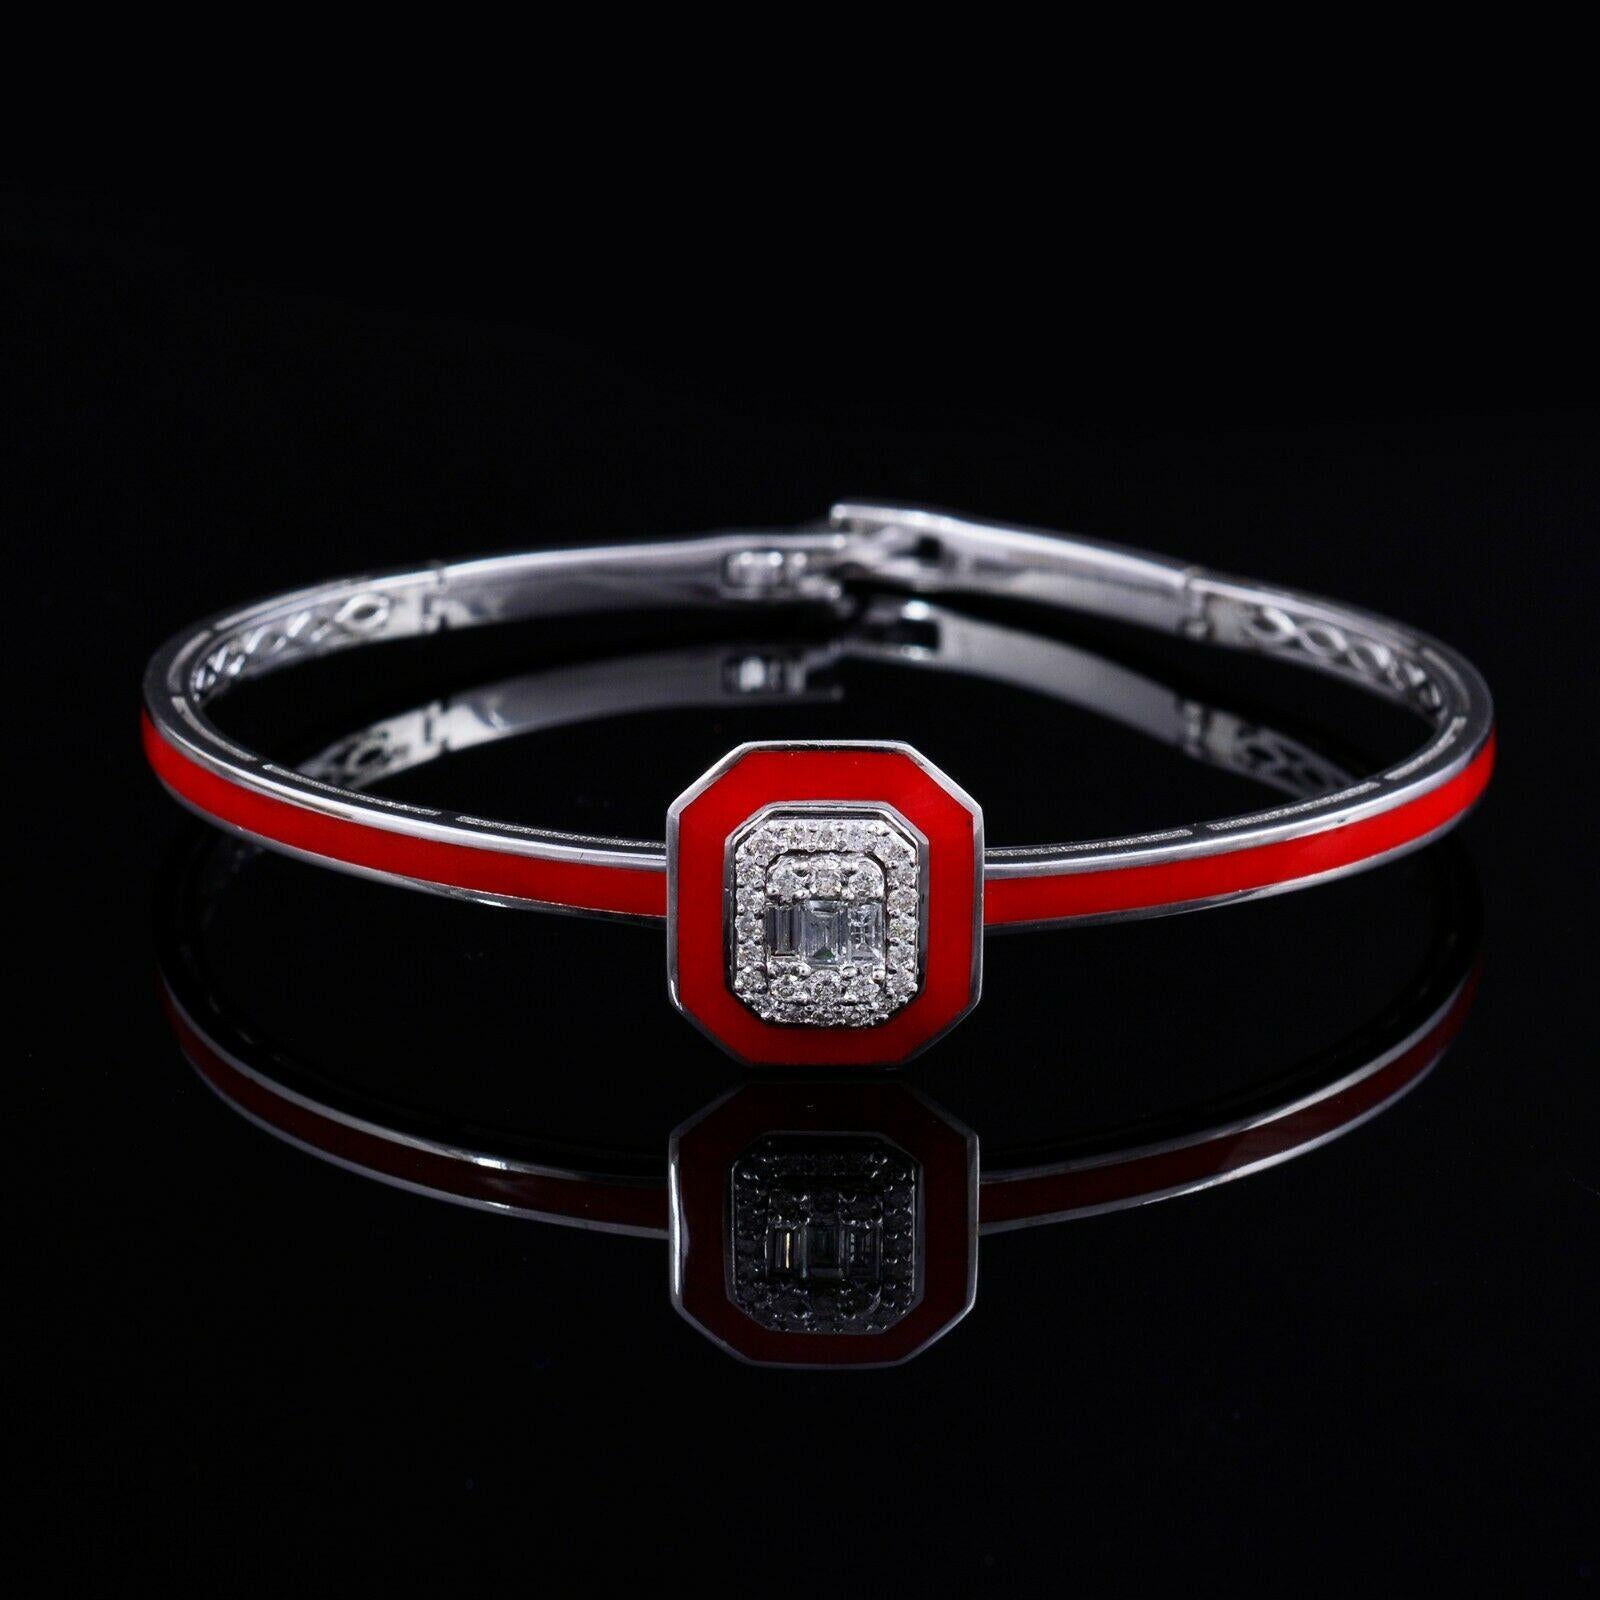 A red enamel bangle bracelet handmade in 18K white gold & set in .35 carats diamonds. 

FOLLOW MEGHNA JEWELS storefront to view the latest collection & exclusive pieces. Meghna Jewels is proudly rated as a Top Seller on 1stdibs with 5 star customer